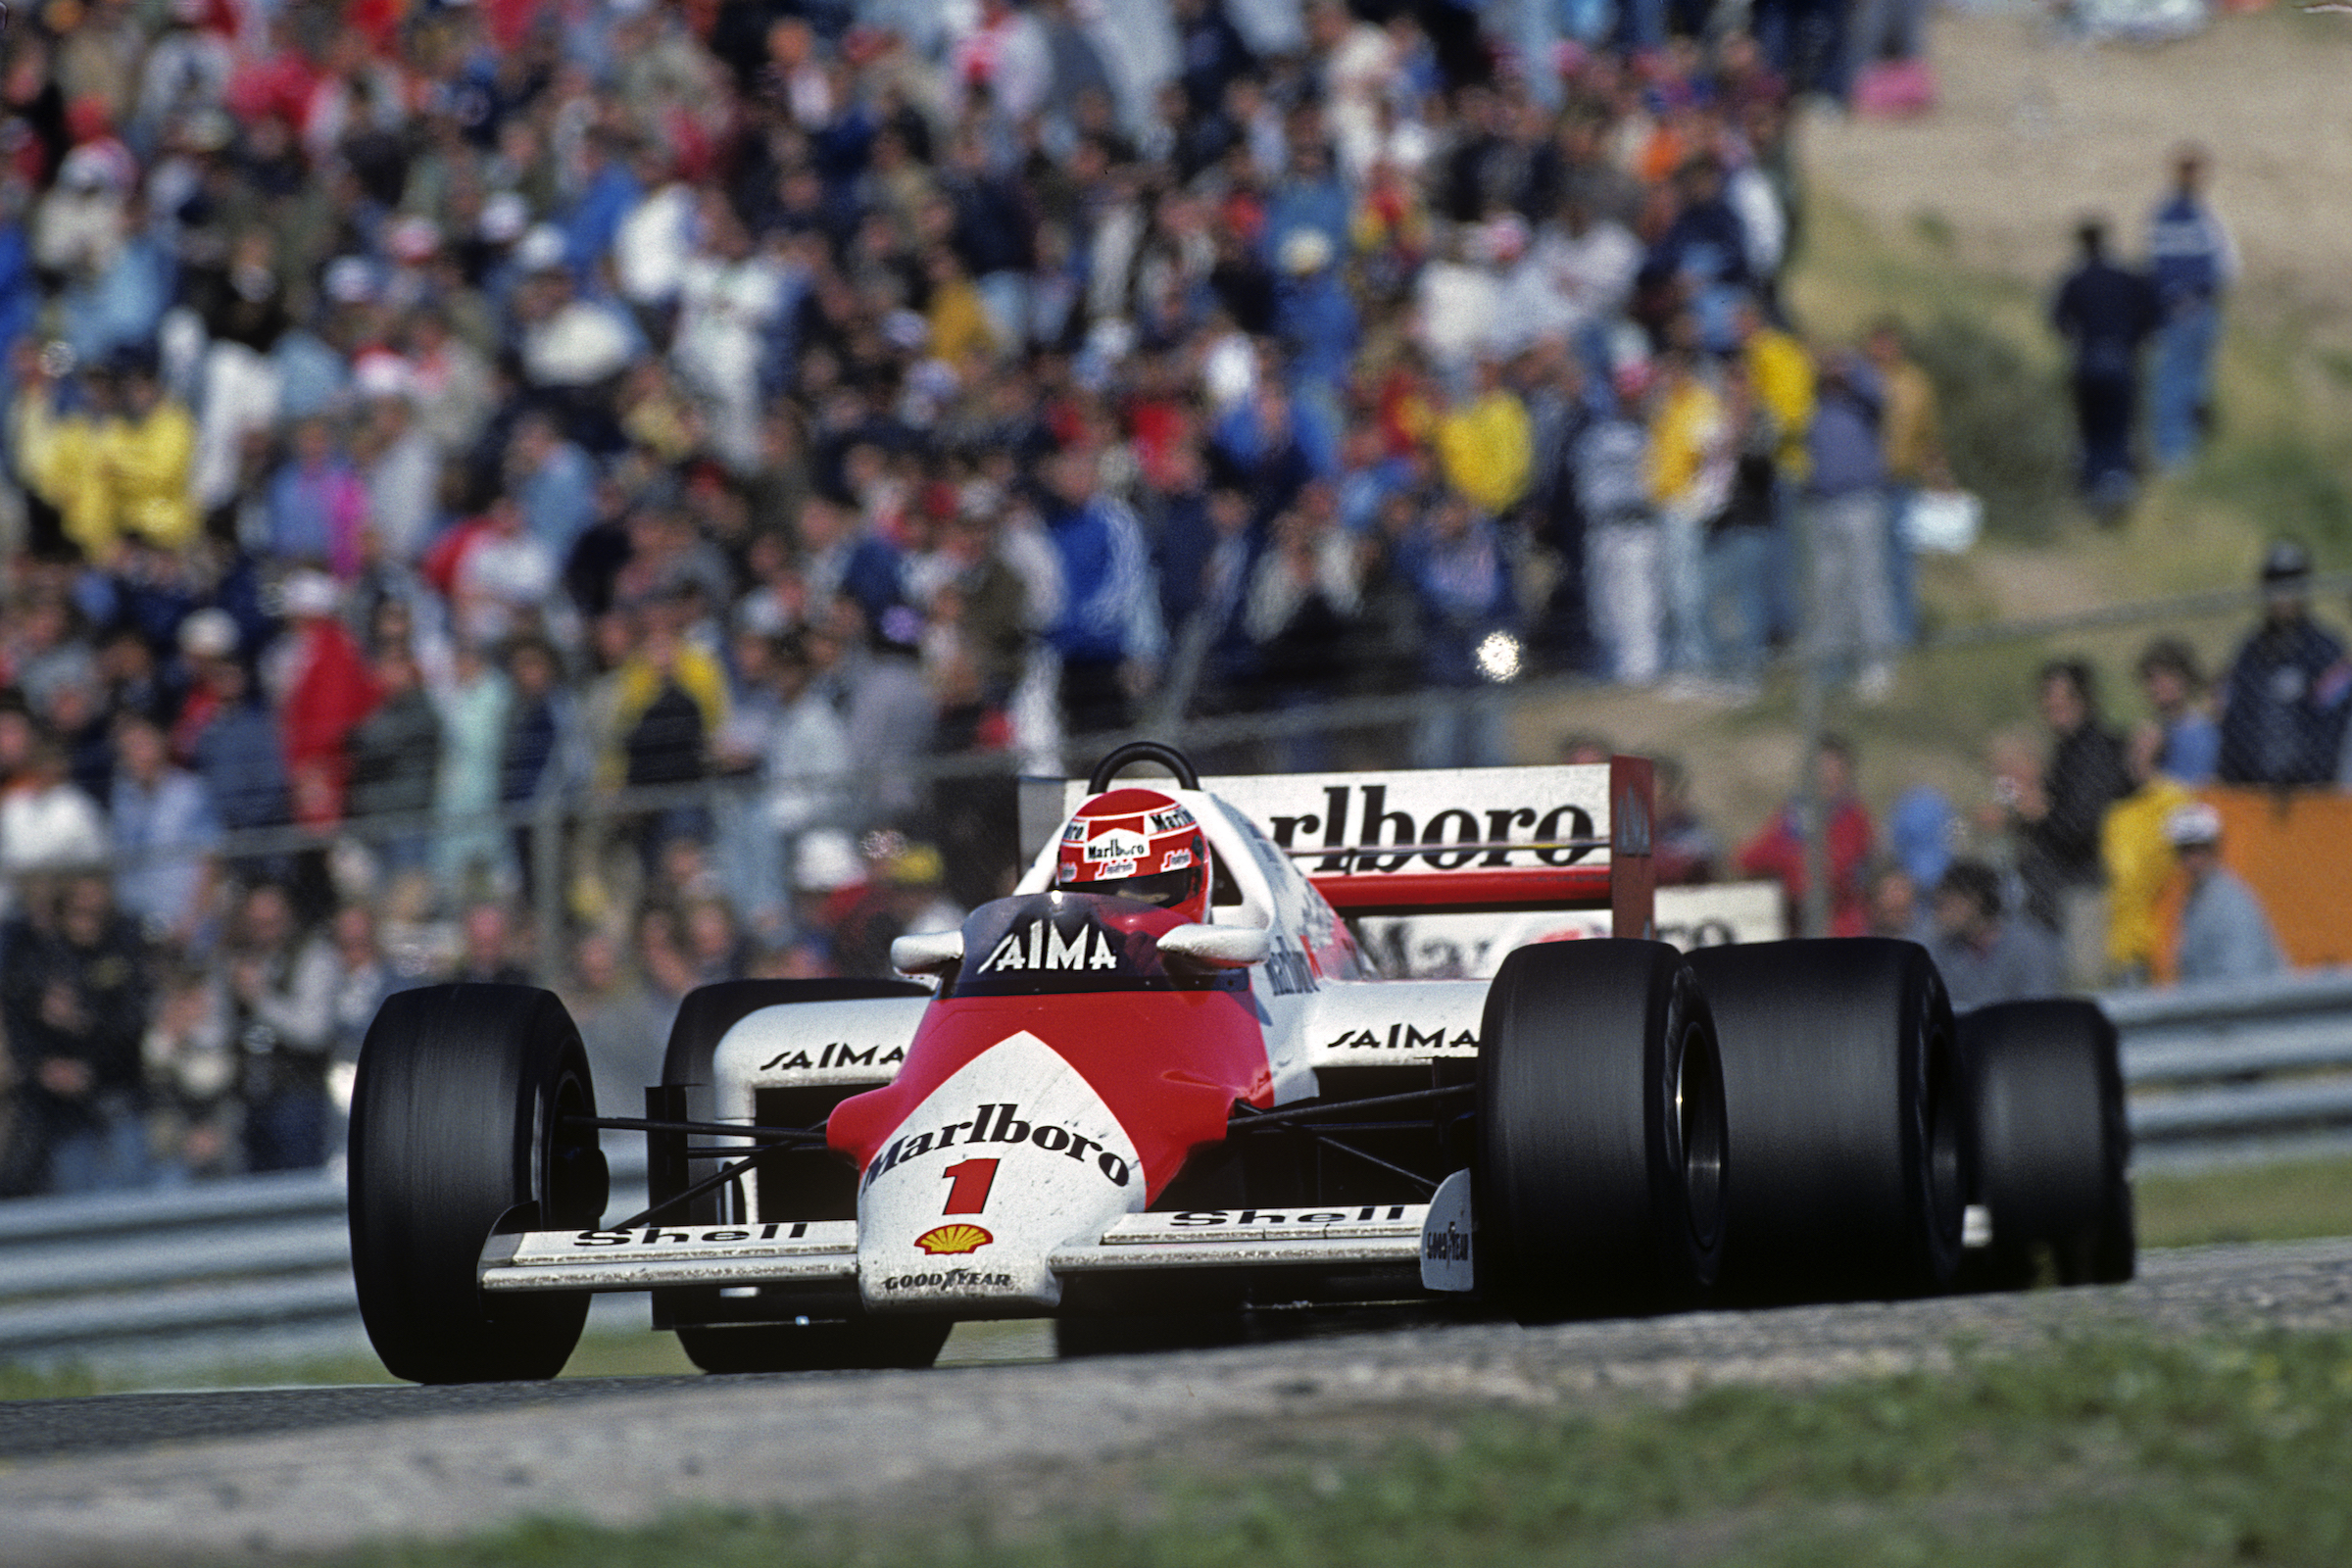 ’85 Dutch Grand Prix: A heavyweight battle between youth and experience